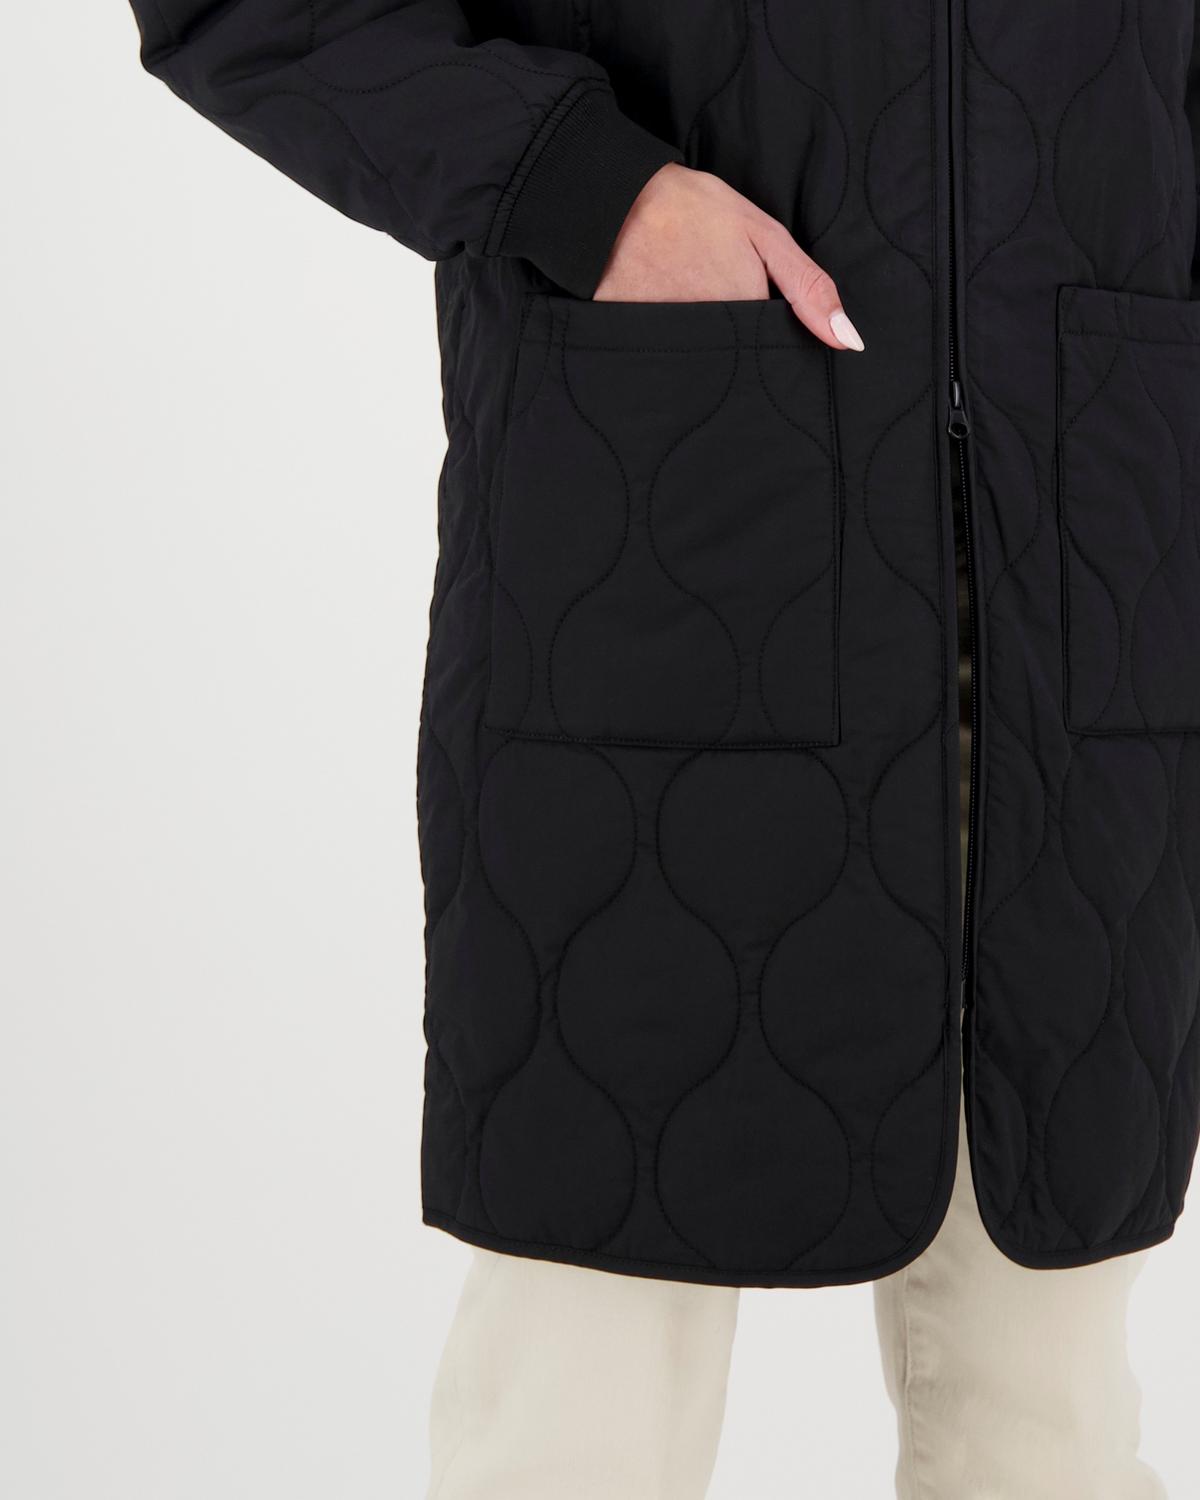 Poetry Kristina Long Line Quilted Coat -  black